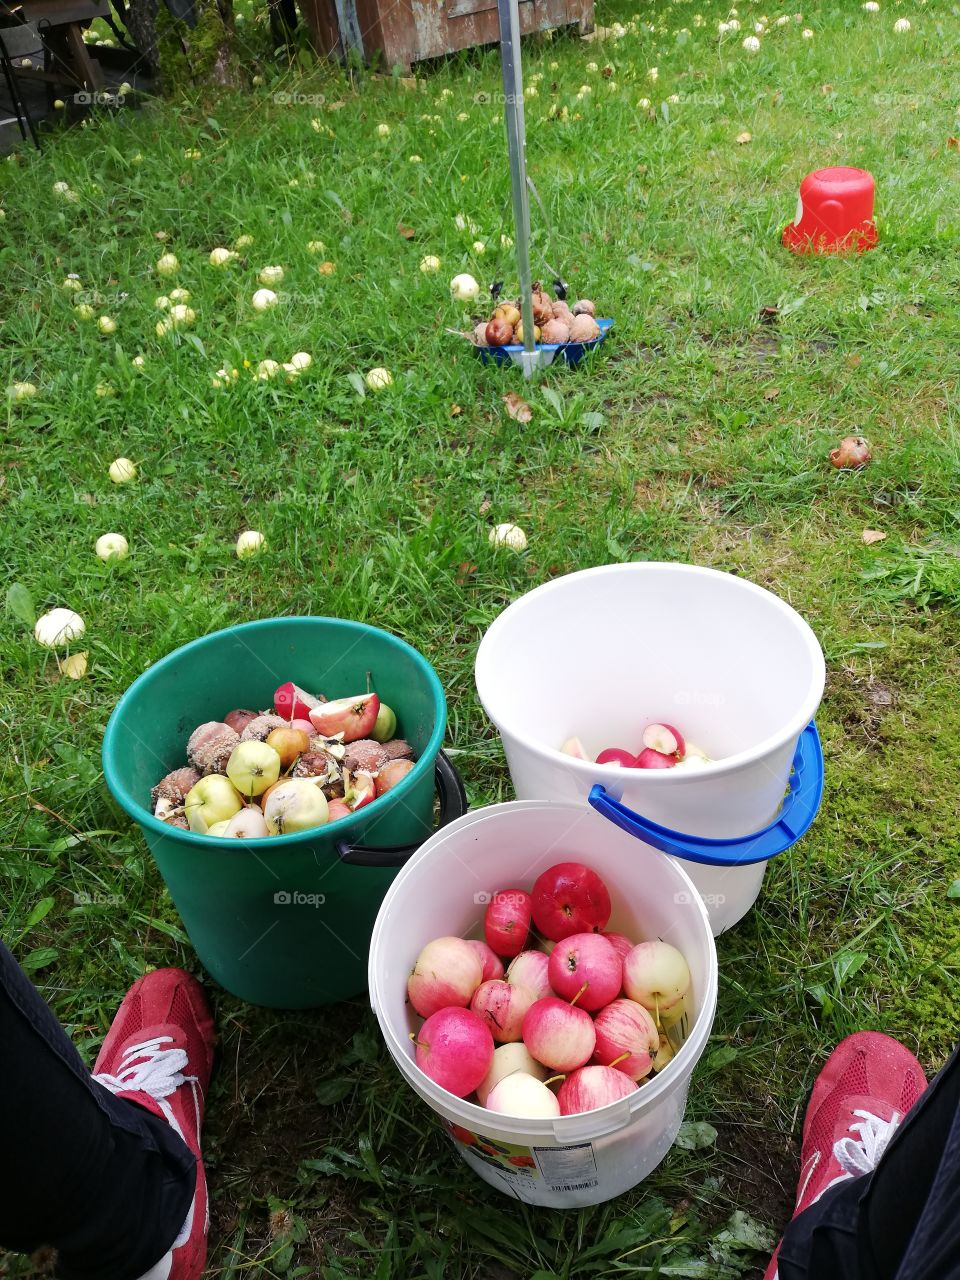 The apples are matured. Many of them have fallen to the grass. Three buckets, in one whole fresh apples, in another cut pieces and in third spoiled ones to throw away. A dustpan and a bowl upside down.